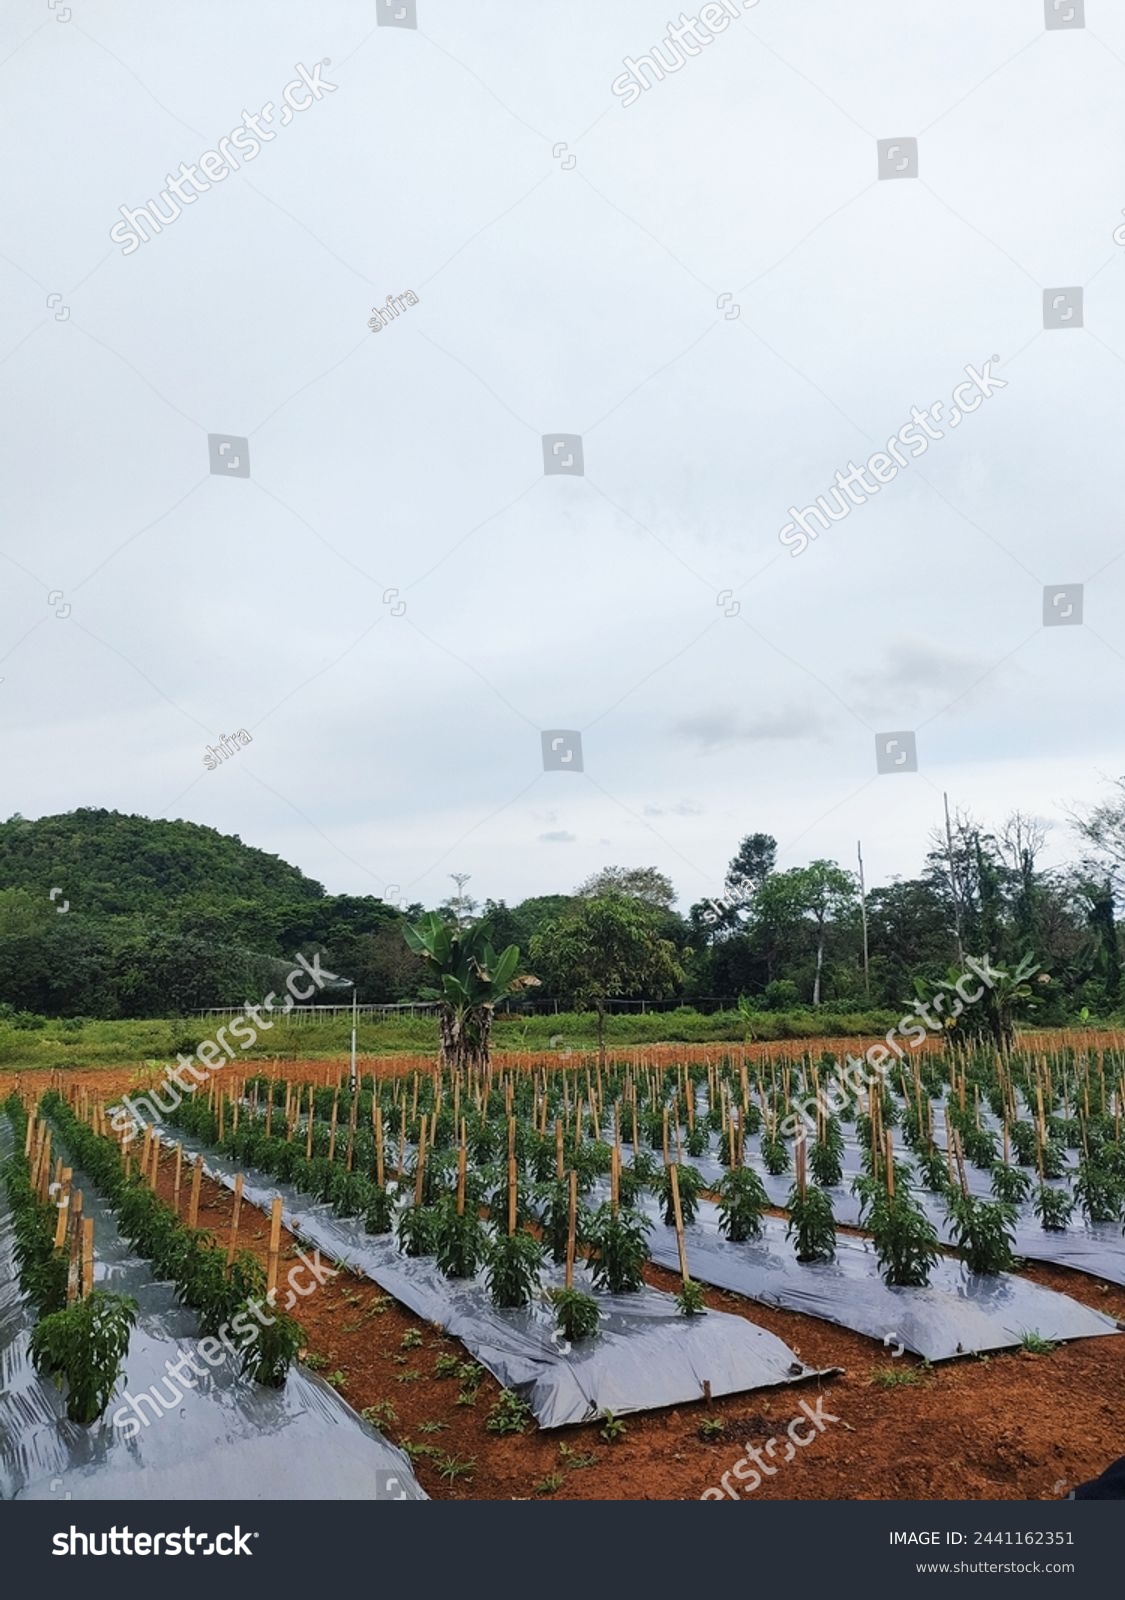 Indonesia - September 20, 2022 : Cultivation of Two-Week-Old Chili Plants on Agricultural Soil #2441162351